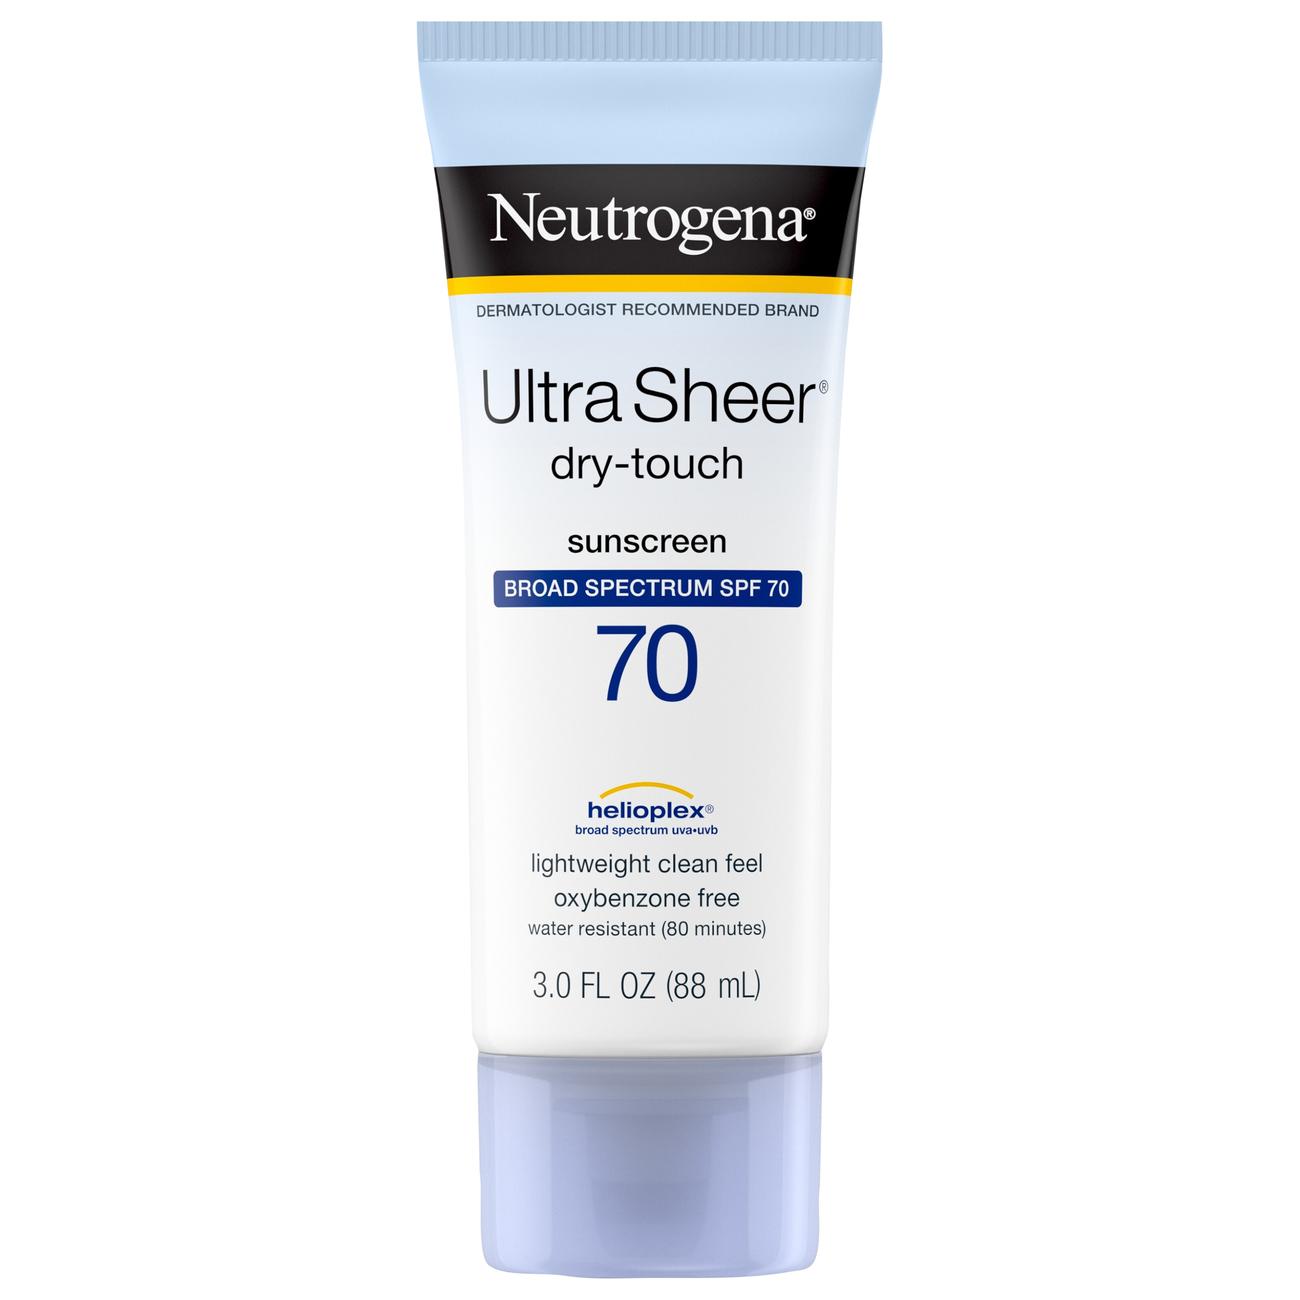 Neutrogena Ultra Sheer Dry-Touch Sunscreen Lotion - SPF 70; image 1 of 2